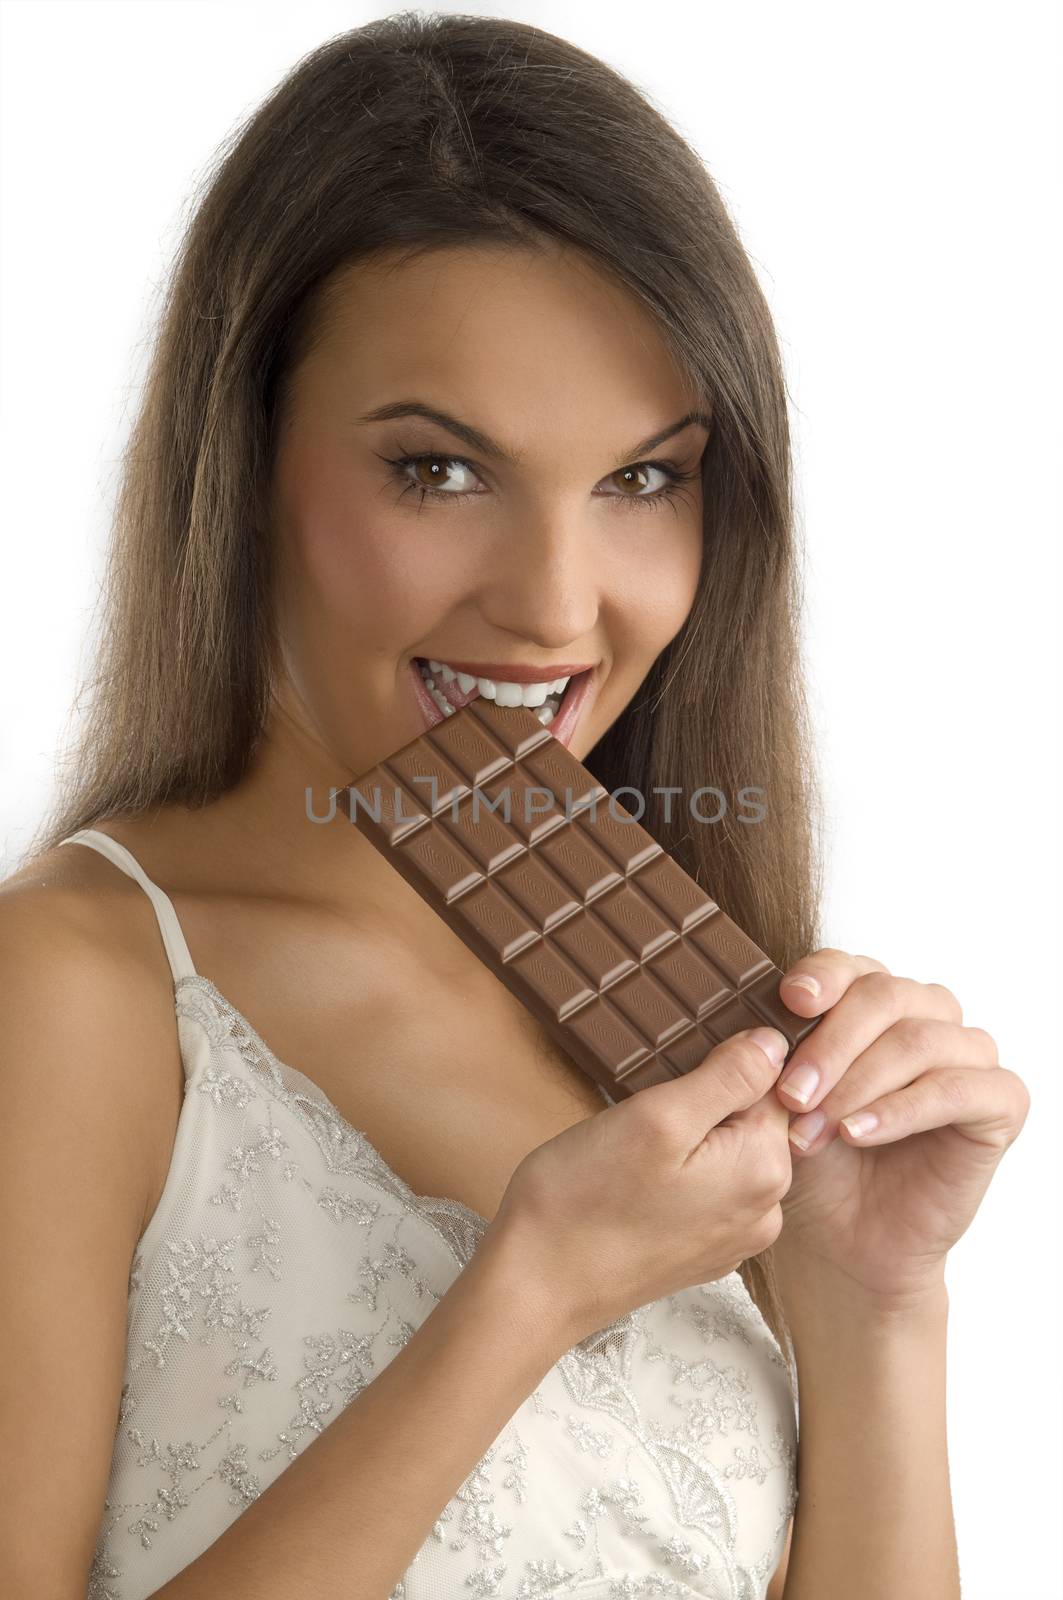 pretty young brunette biting a block of chocolate with her teeth